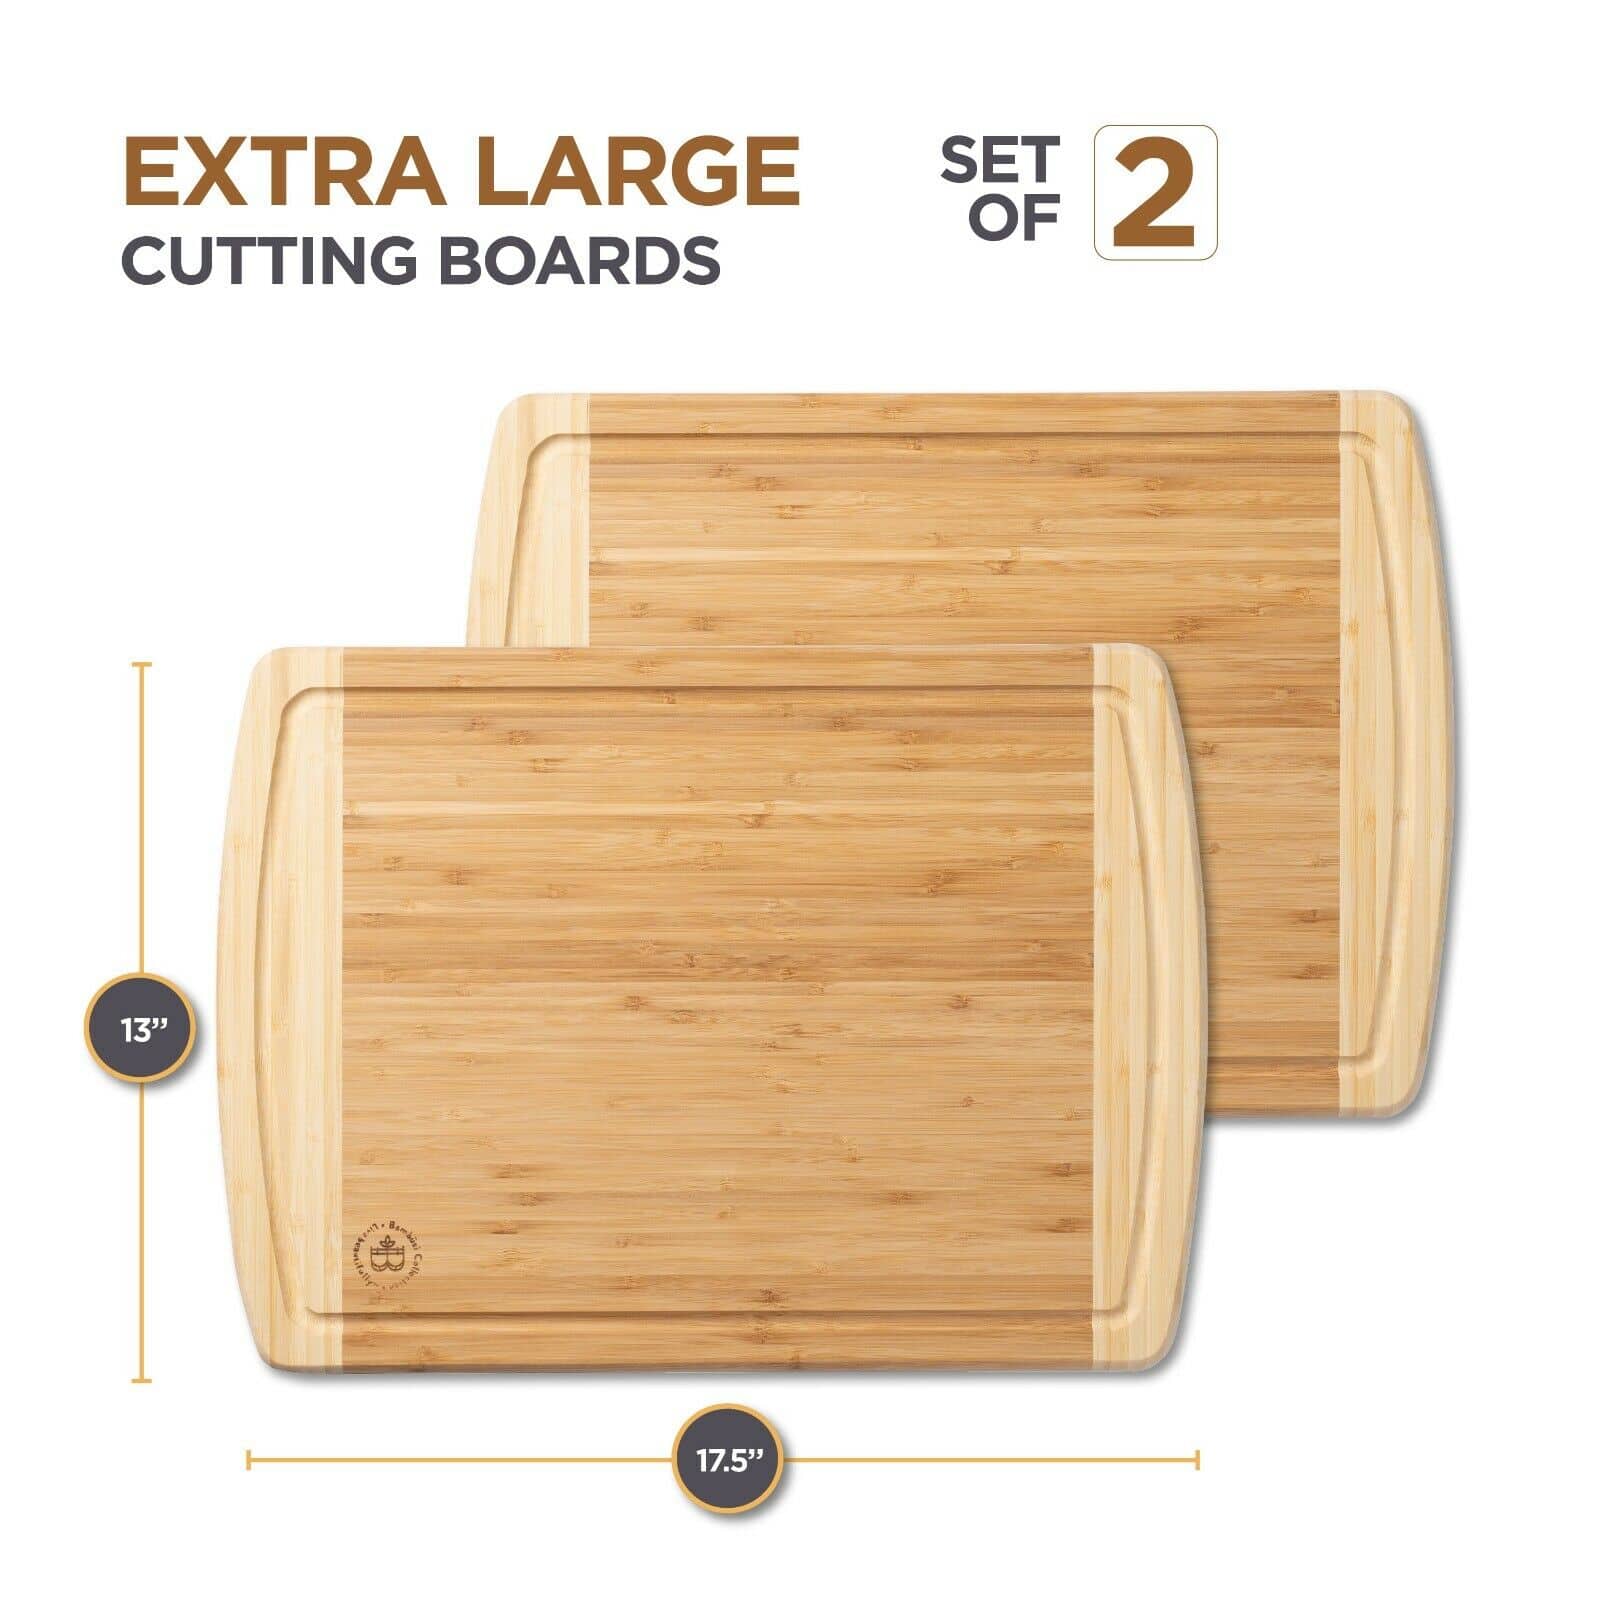 Premium Thick Bamboo Cutting Board Set of 2-Juice Grooves. By Bambusi 5